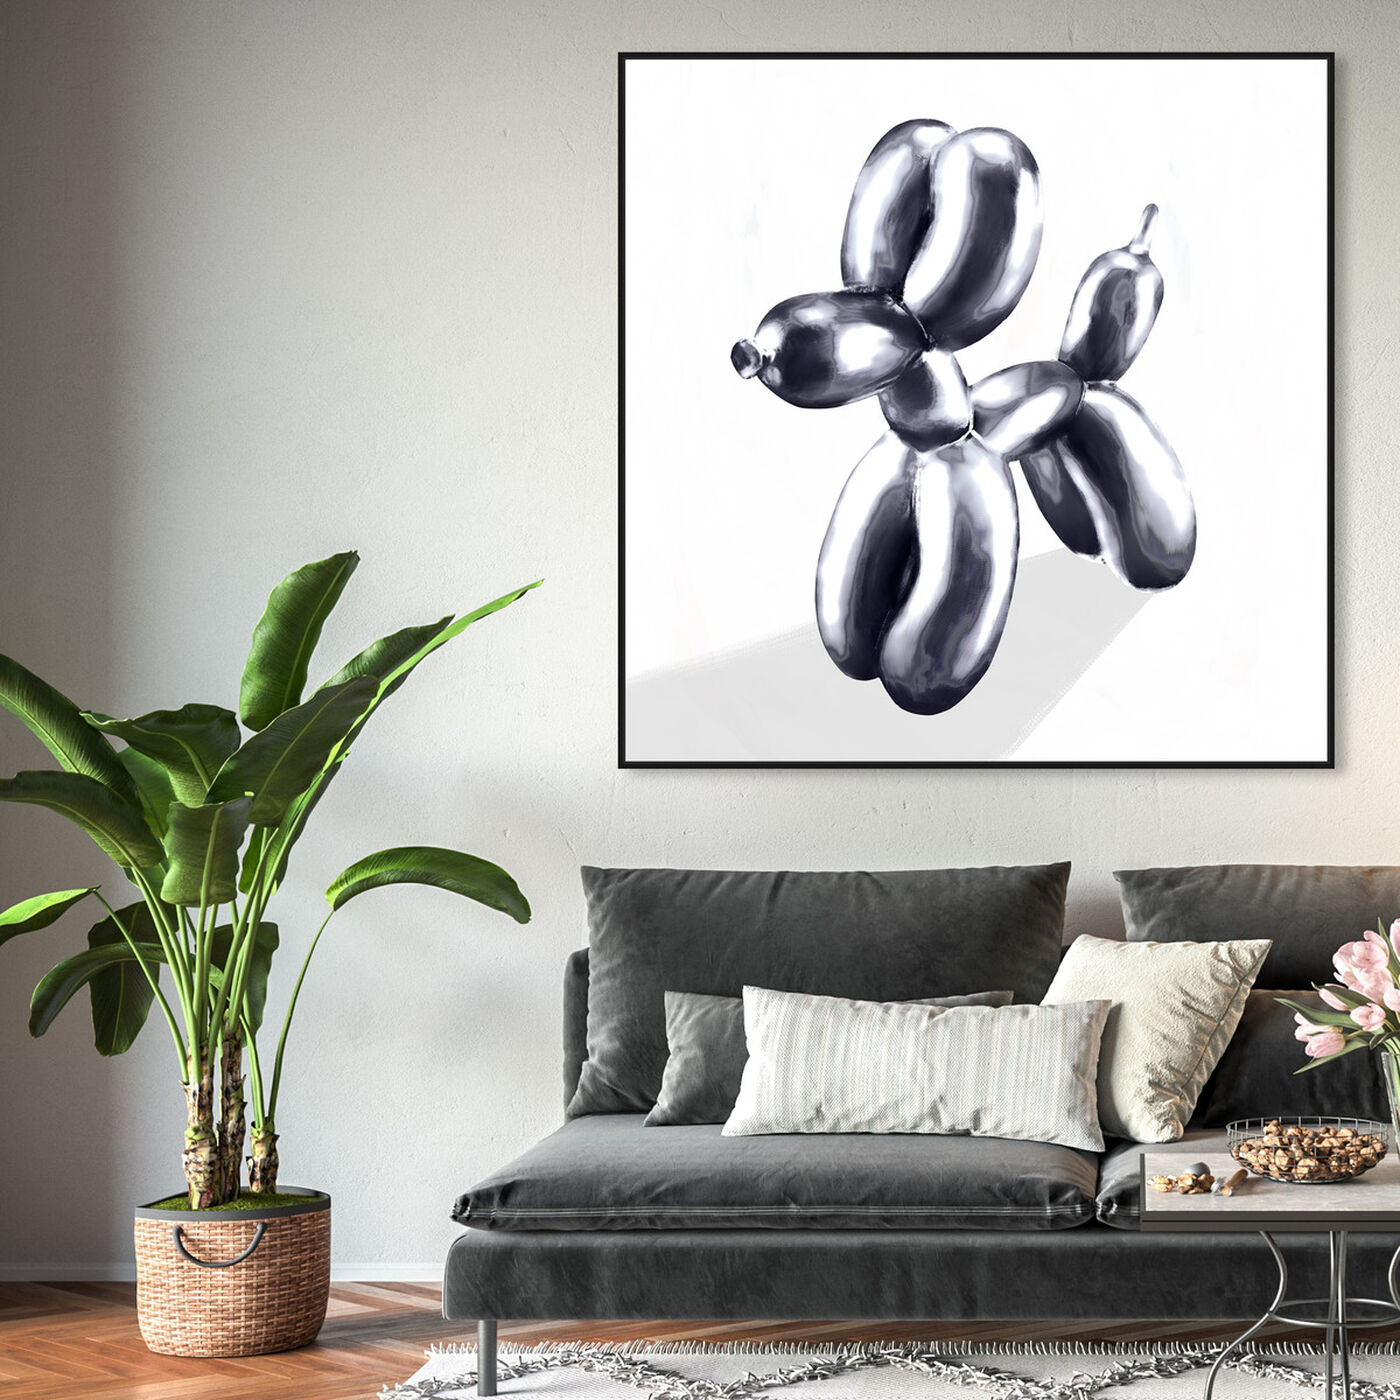 Hanging view of balloon dog featuring animals and dogs and puppies art.